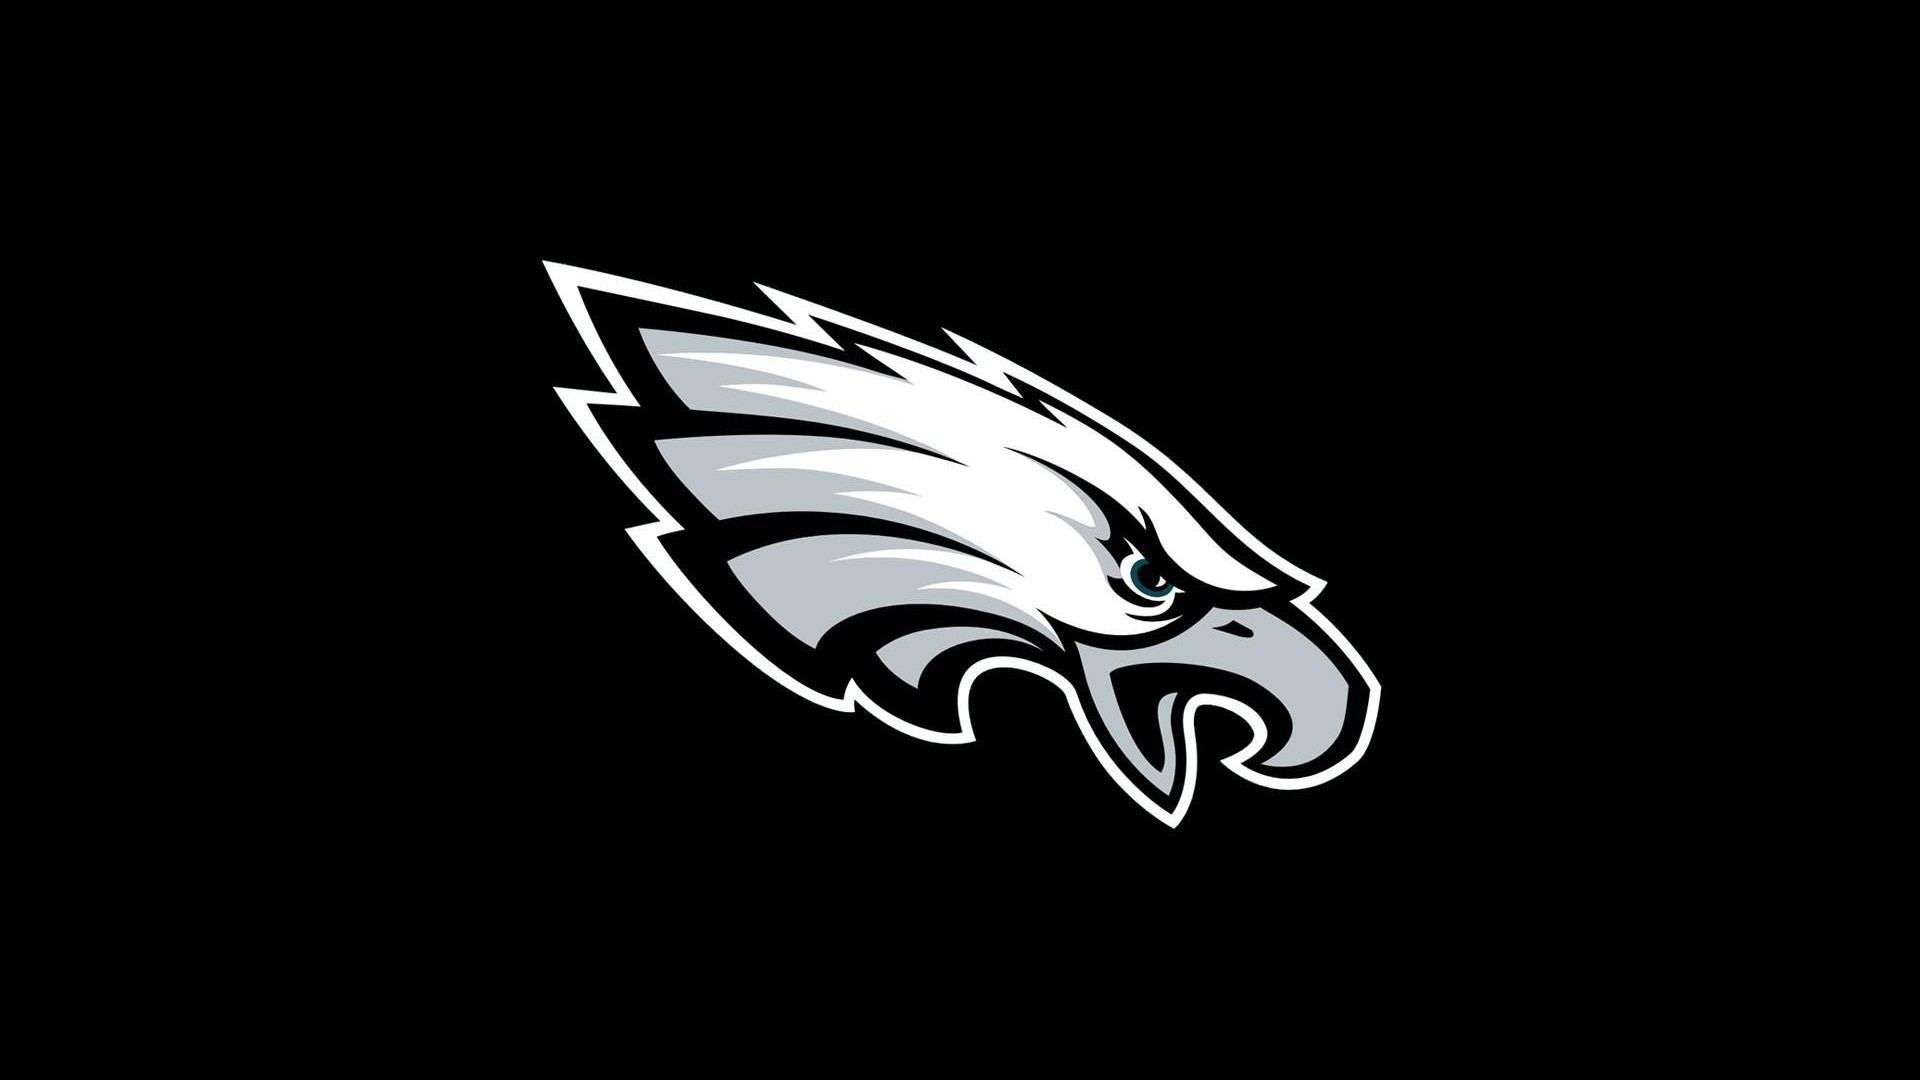 NFL Eagles Wallpaper HD With Resolution 1920X1080 pixel. You can make this wallpaper for your Mac or Windows Desktop Background, iPhone, Android or Tablet and another Smartphone device for free